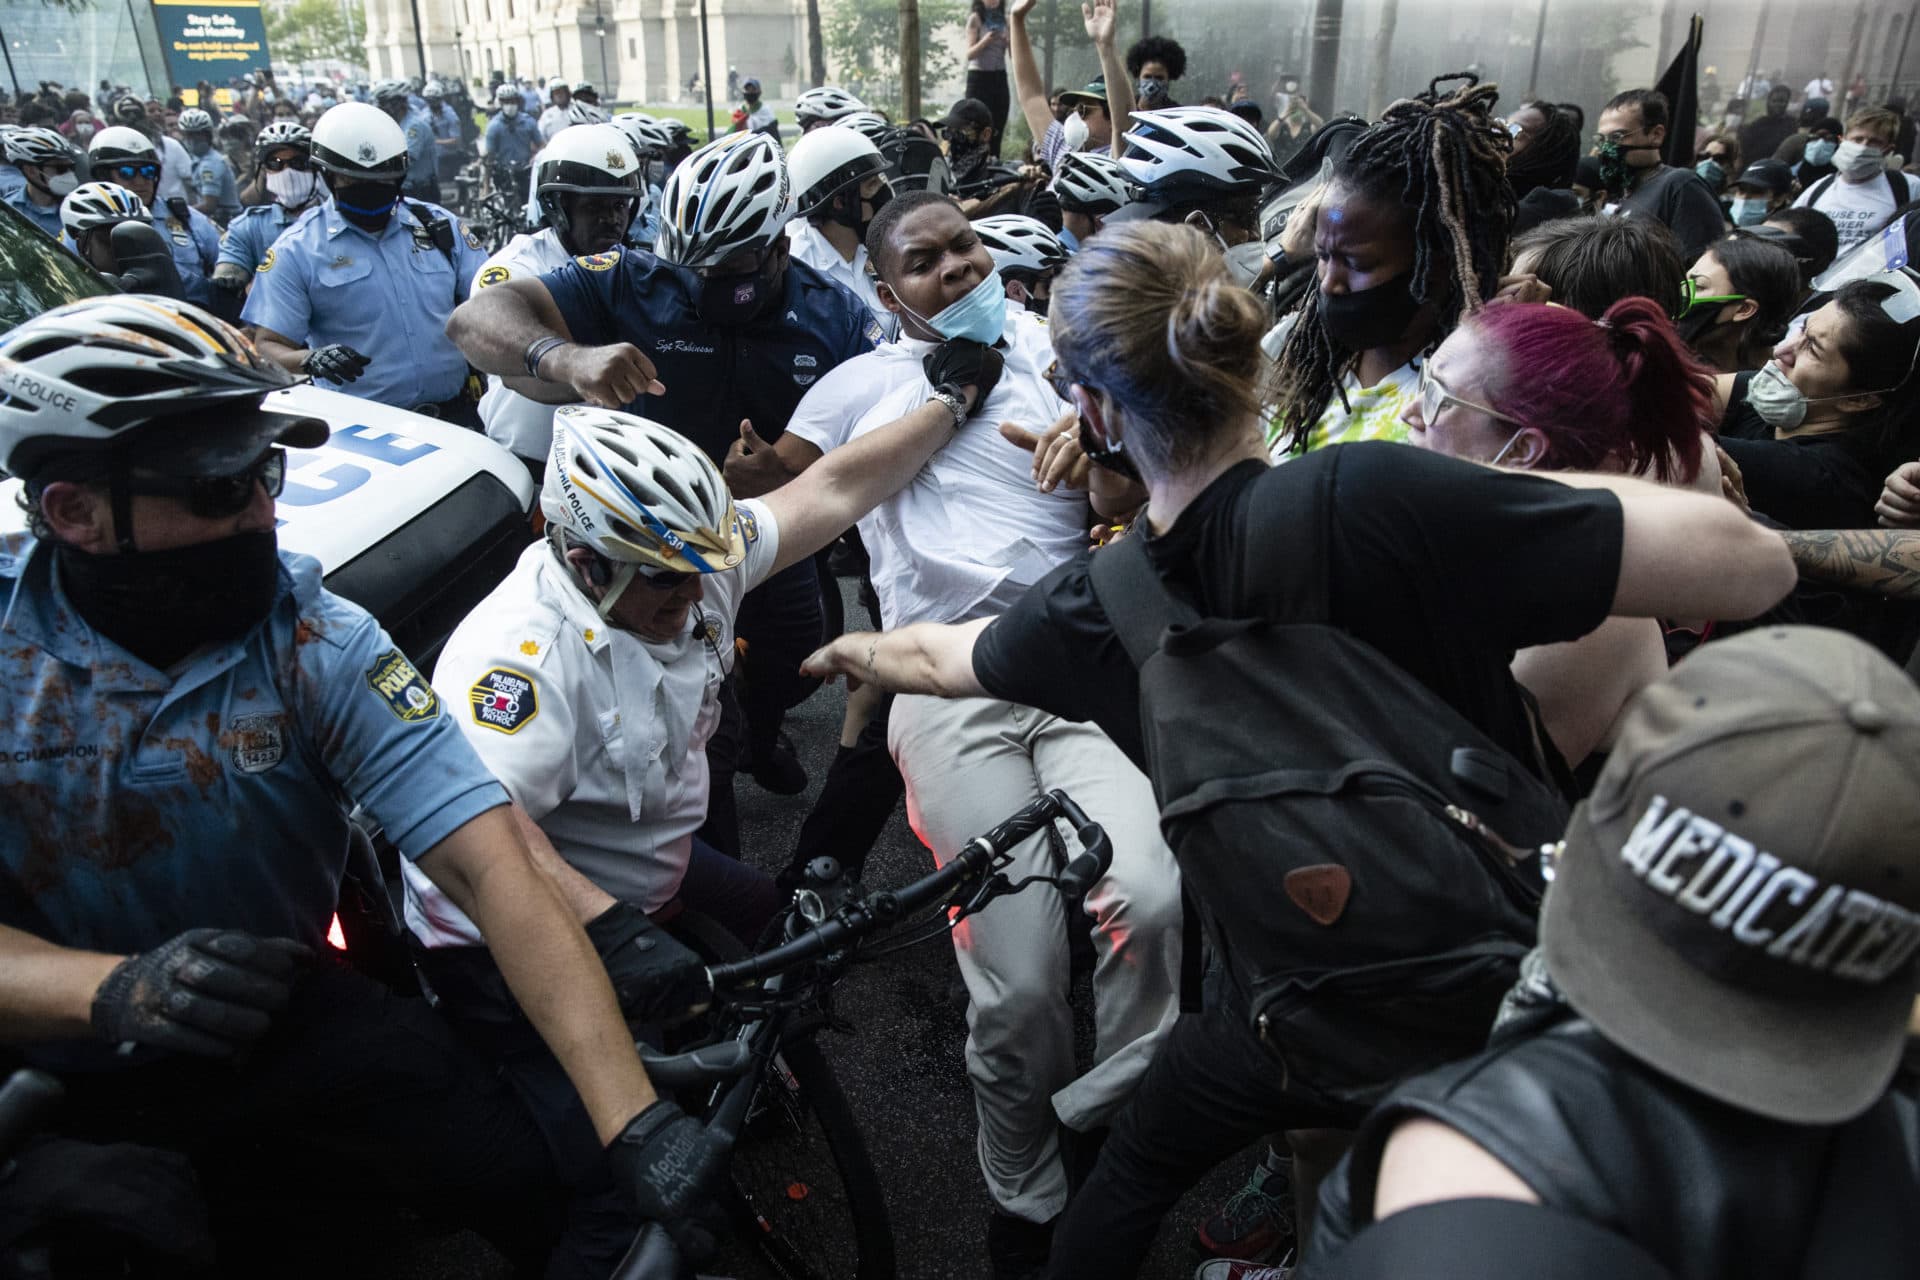 Police and protesters clashed on Saturday in Philadelphia, during a demonstration over the death of George Floyd. (Matt Rourke/AP)